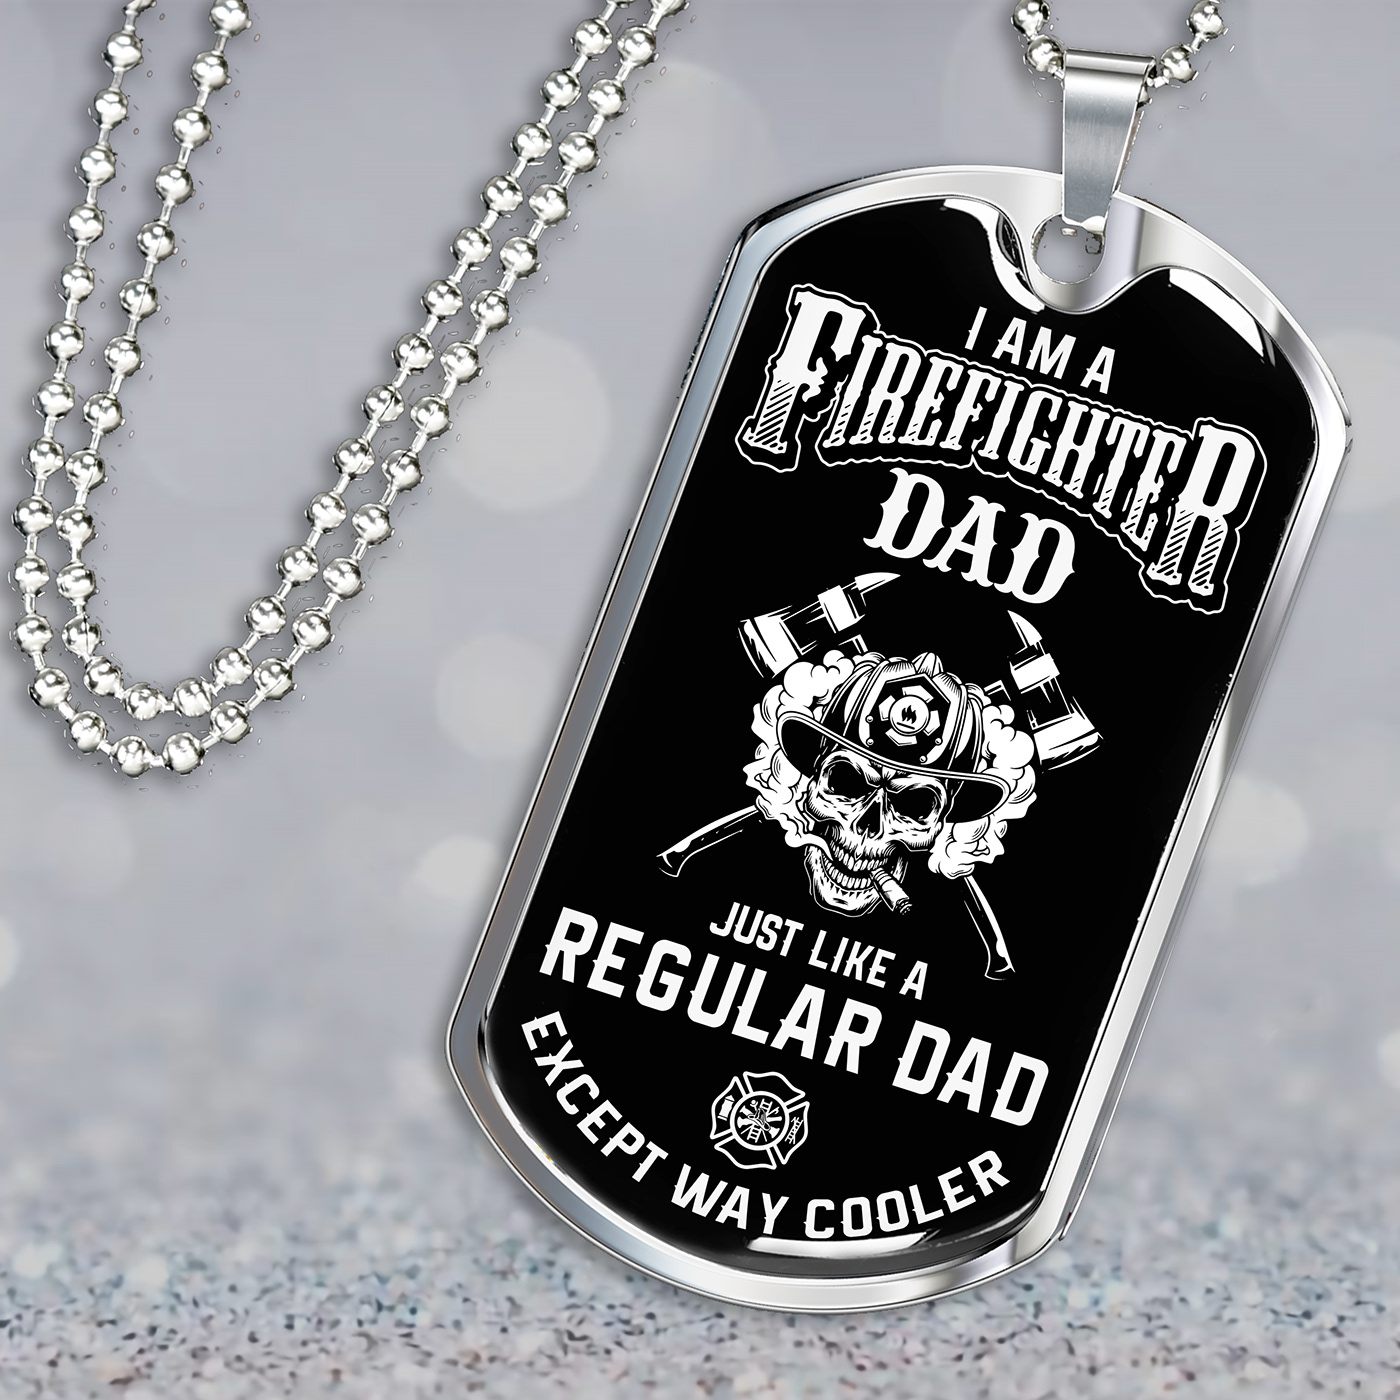 daughter to dad dog tag design fathers day quotes Firefighter free mockup  gearbubble message card Necklace pedant design SHINEON  